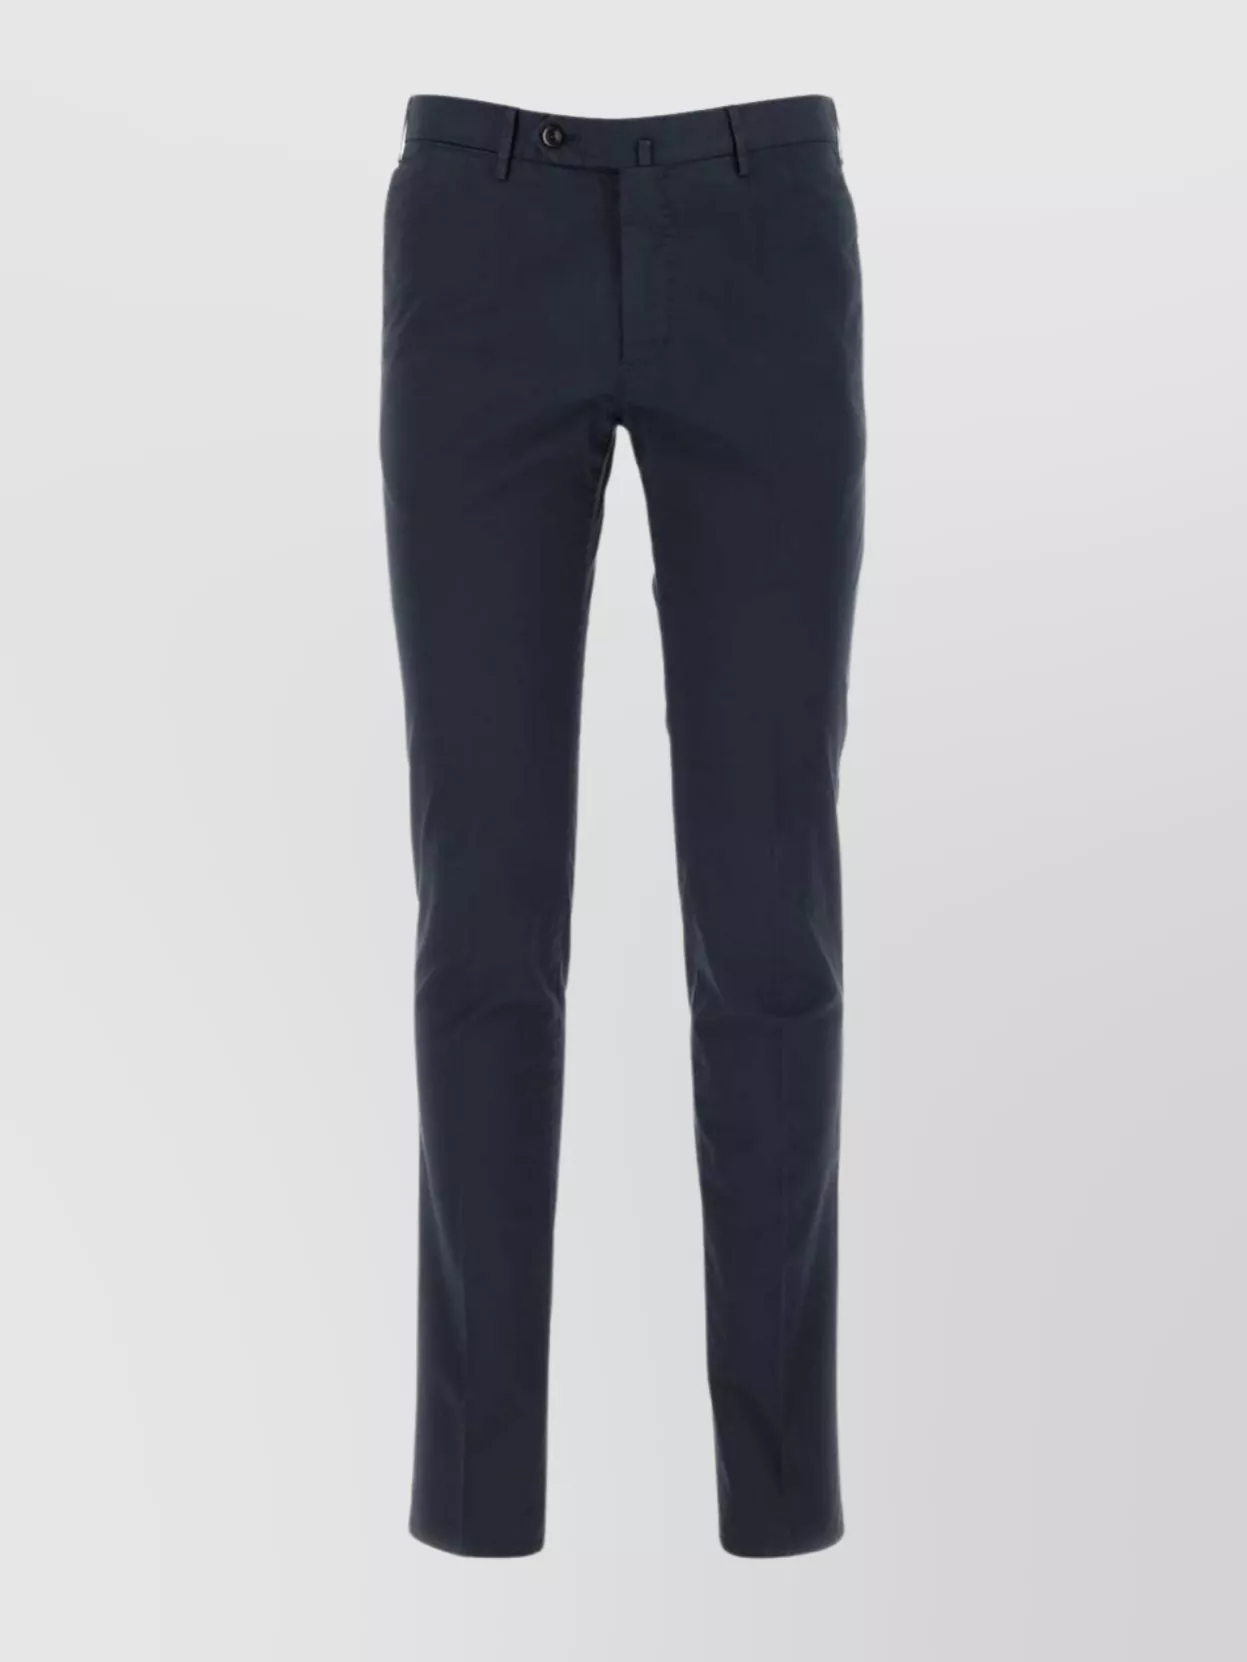 Pt Torino Stretch Cotton Trousers With Back Pockets And Belt Loops In Blue